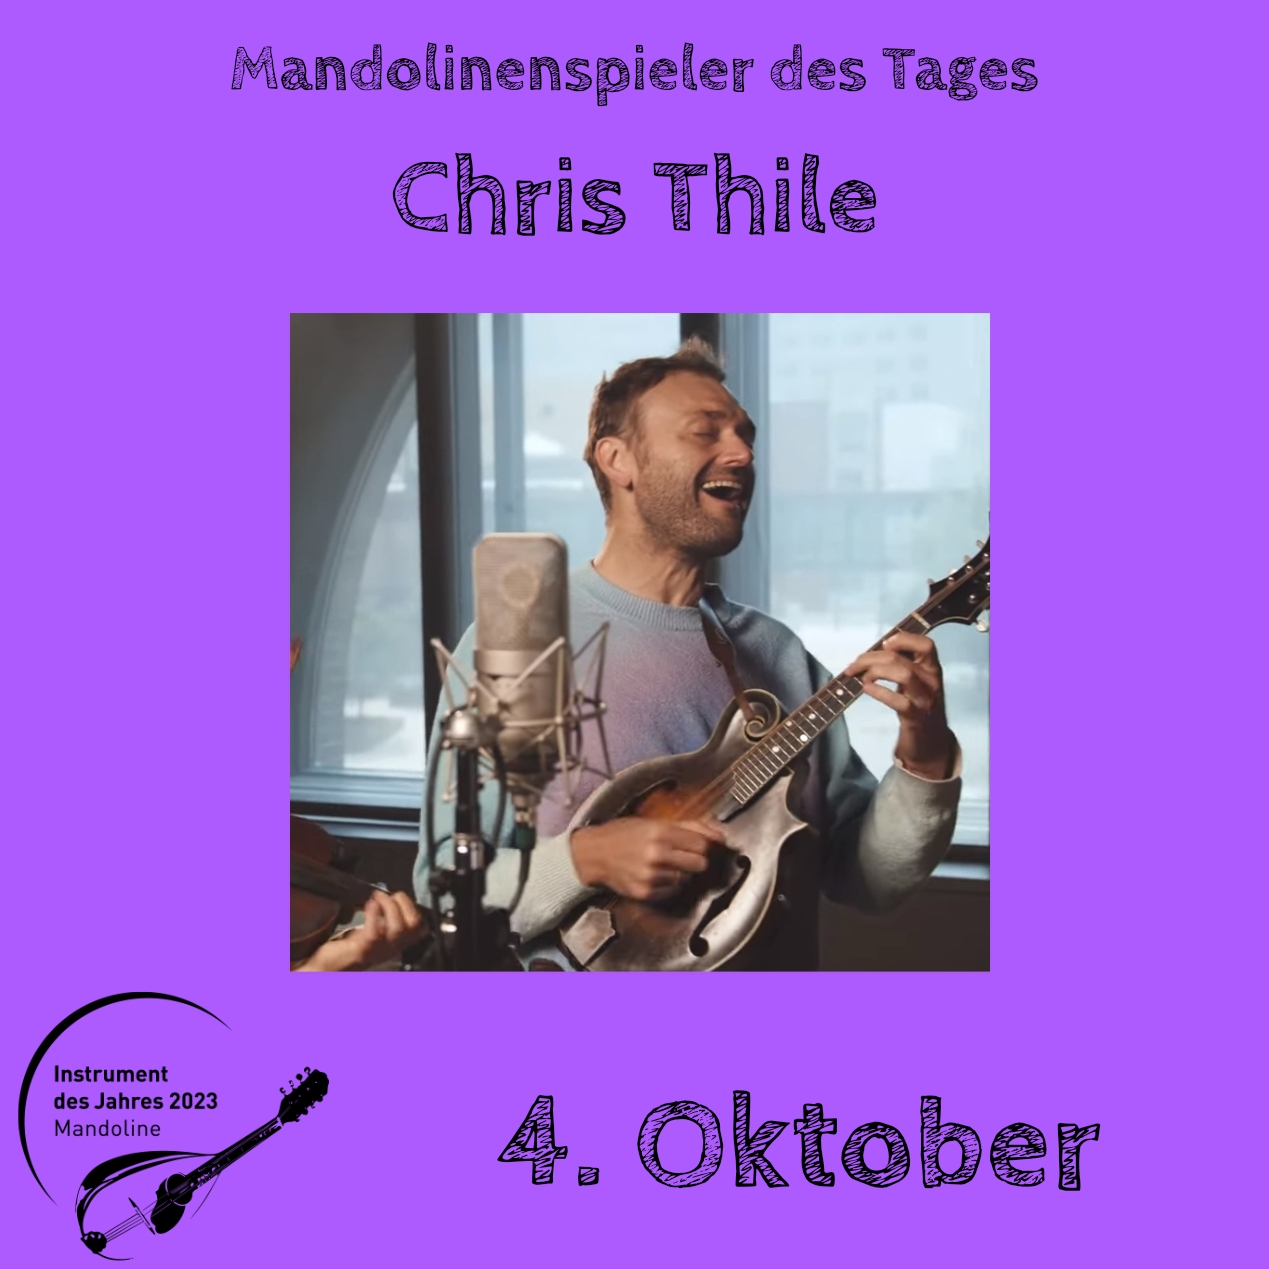 You are currently viewing 4. Oktober – Chris Thile